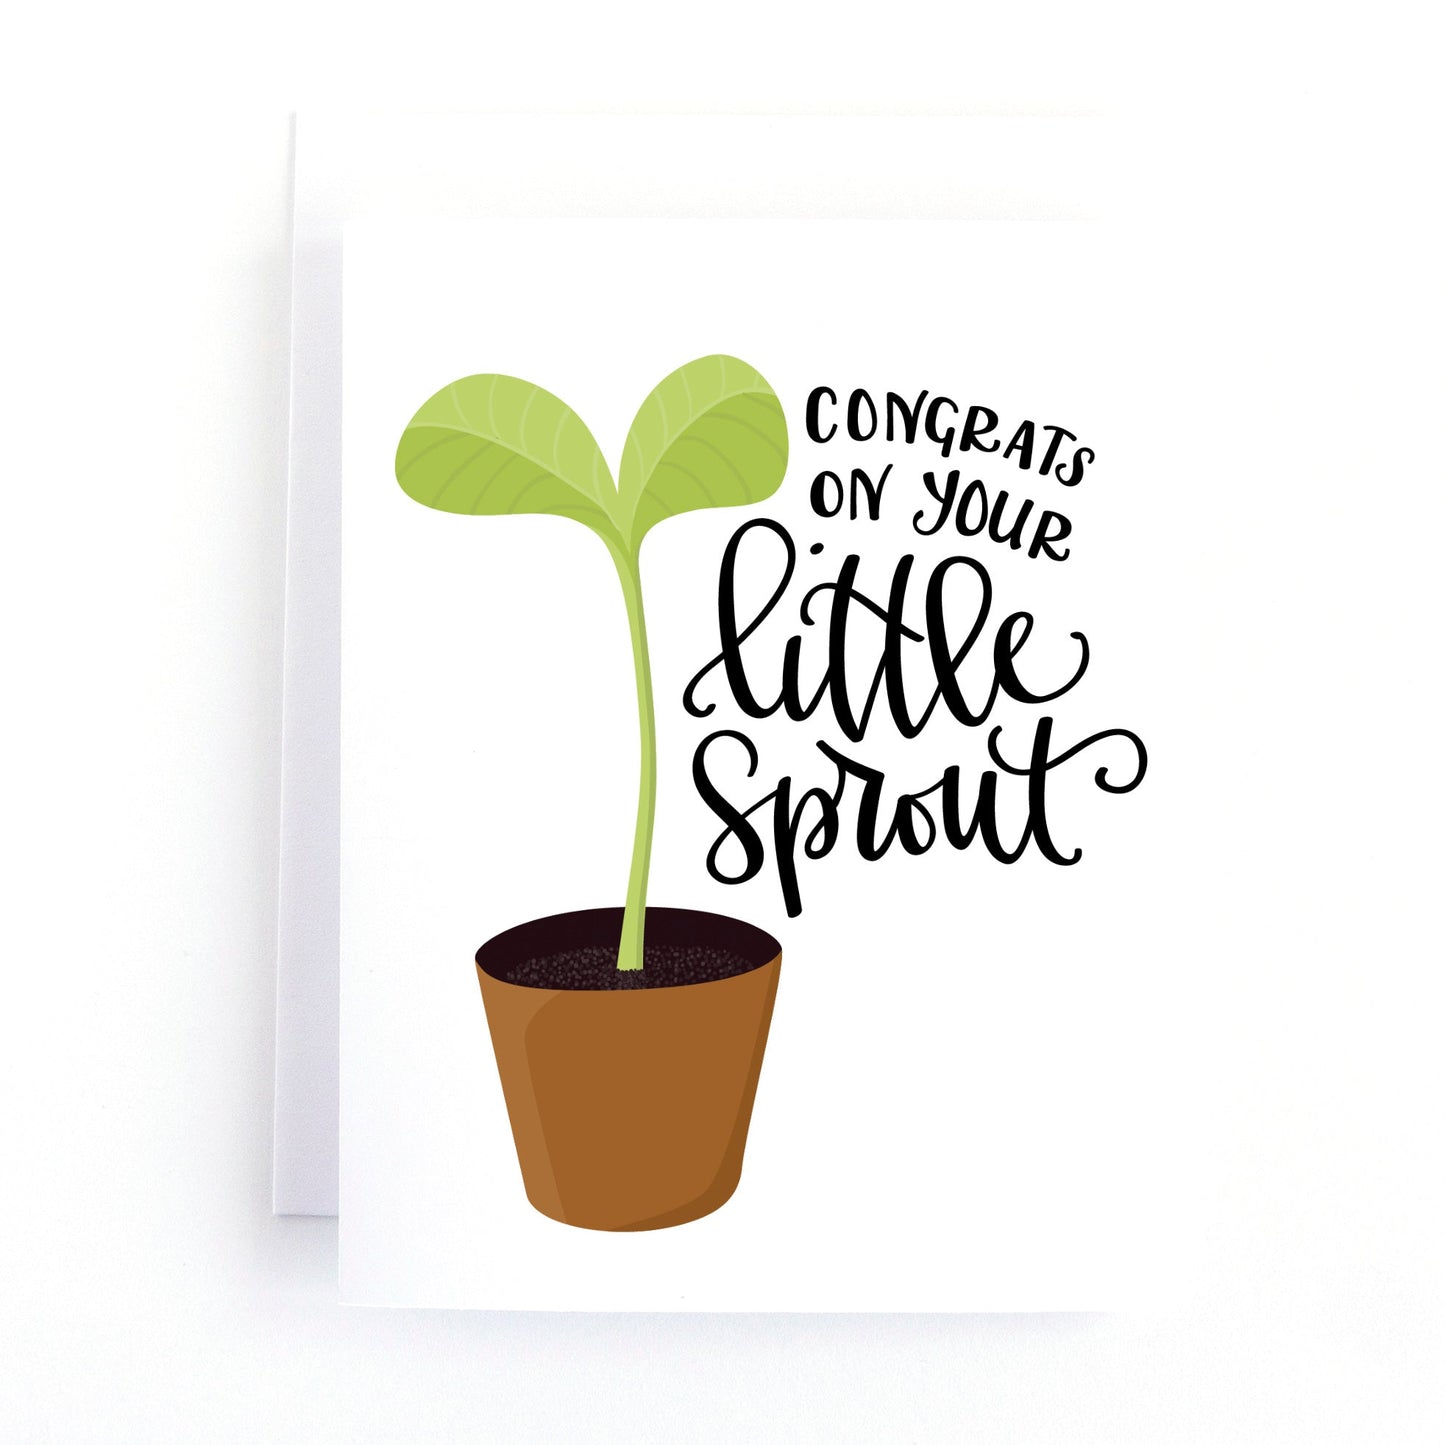 Modern Baby shower card featuring a seedling plant and hand drawn greeting. Gender neutral